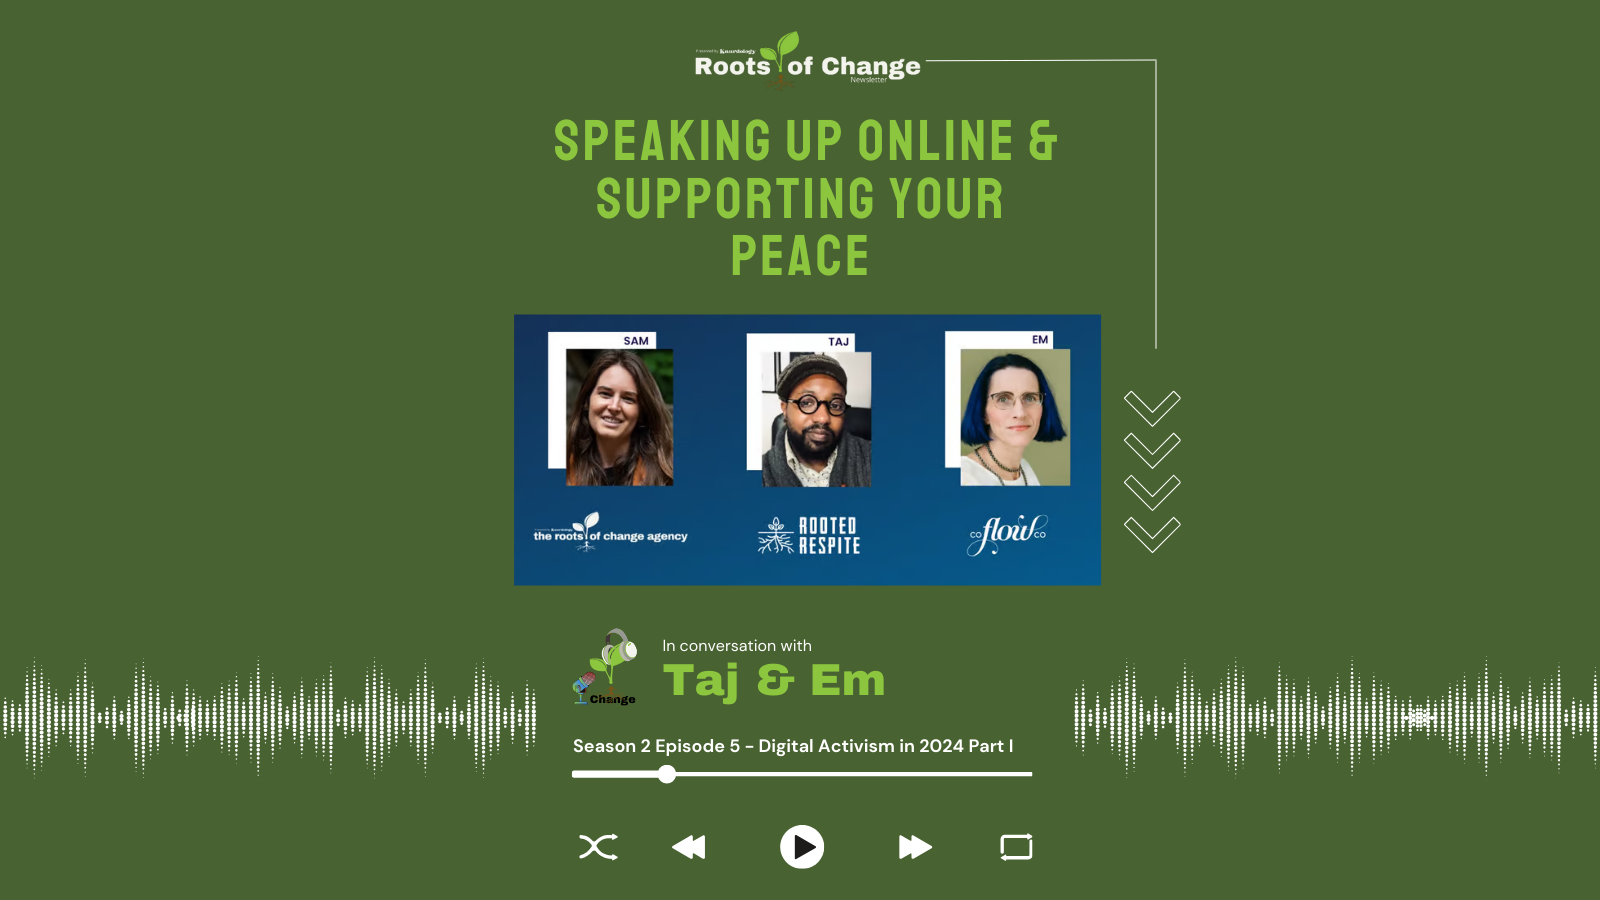 🎙 Speak Up Online & Support Your Peace with Taj & Em